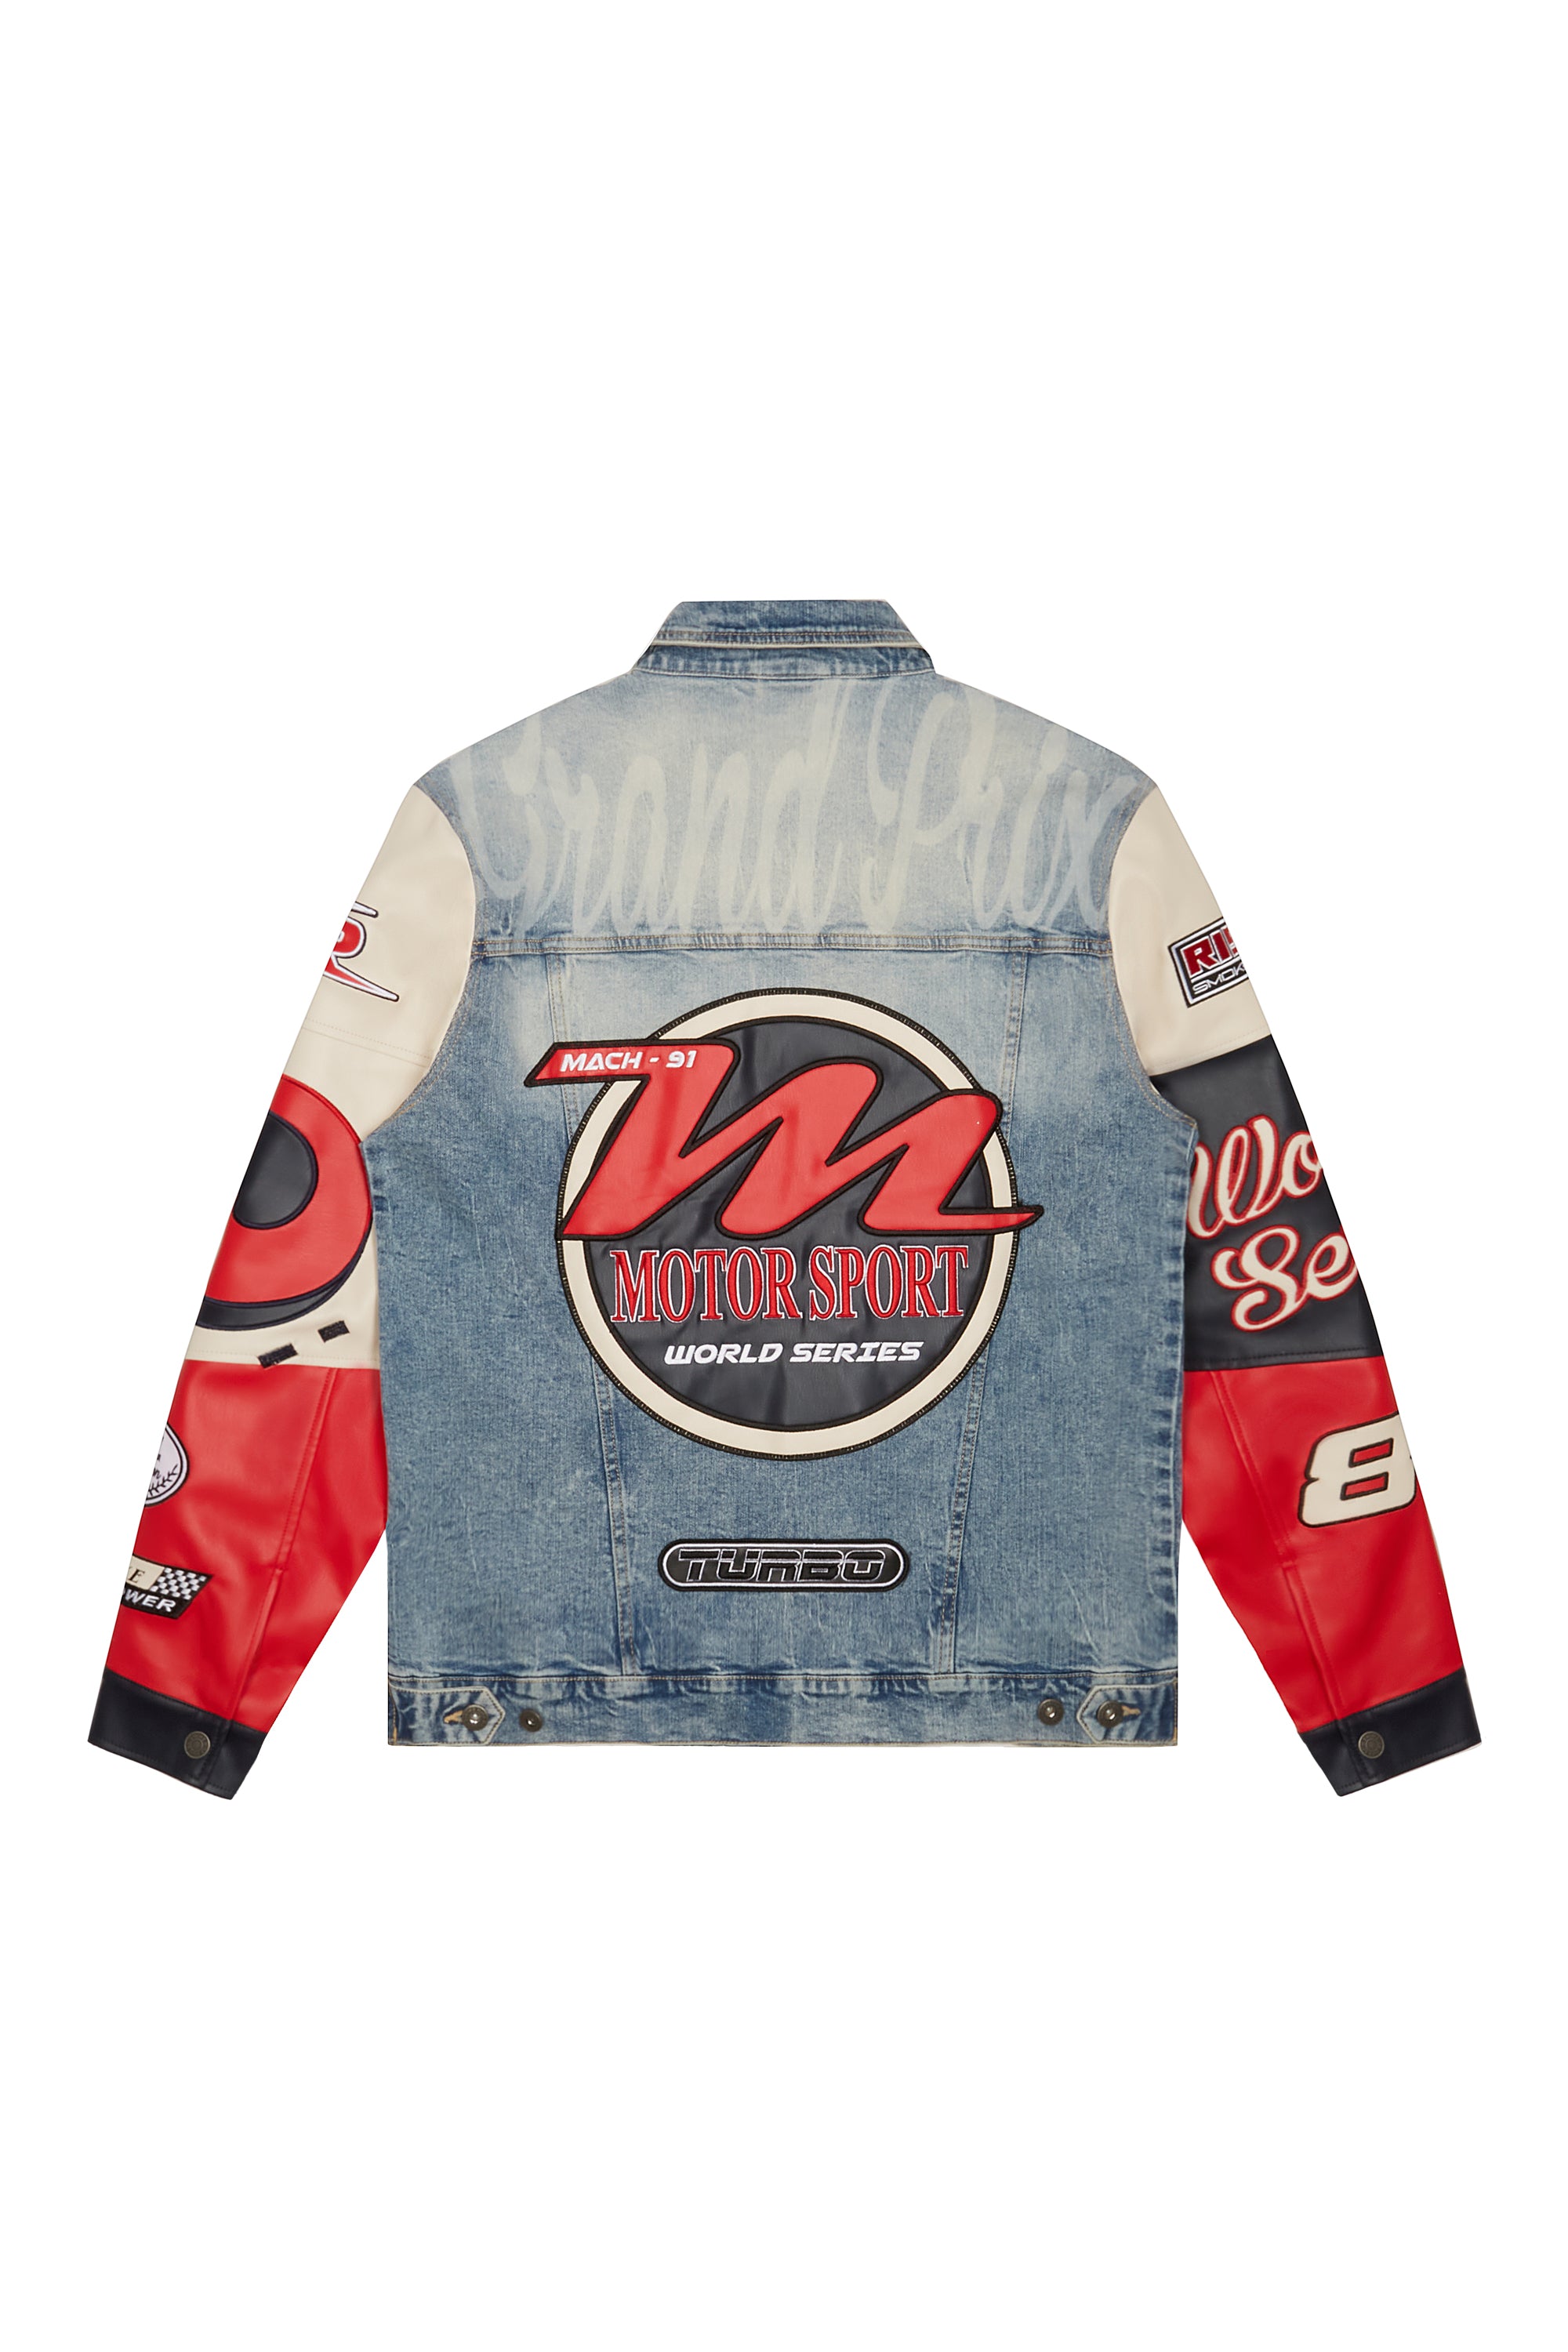 Embroidered Patched Racing Jean Jacket - Beacon Blue